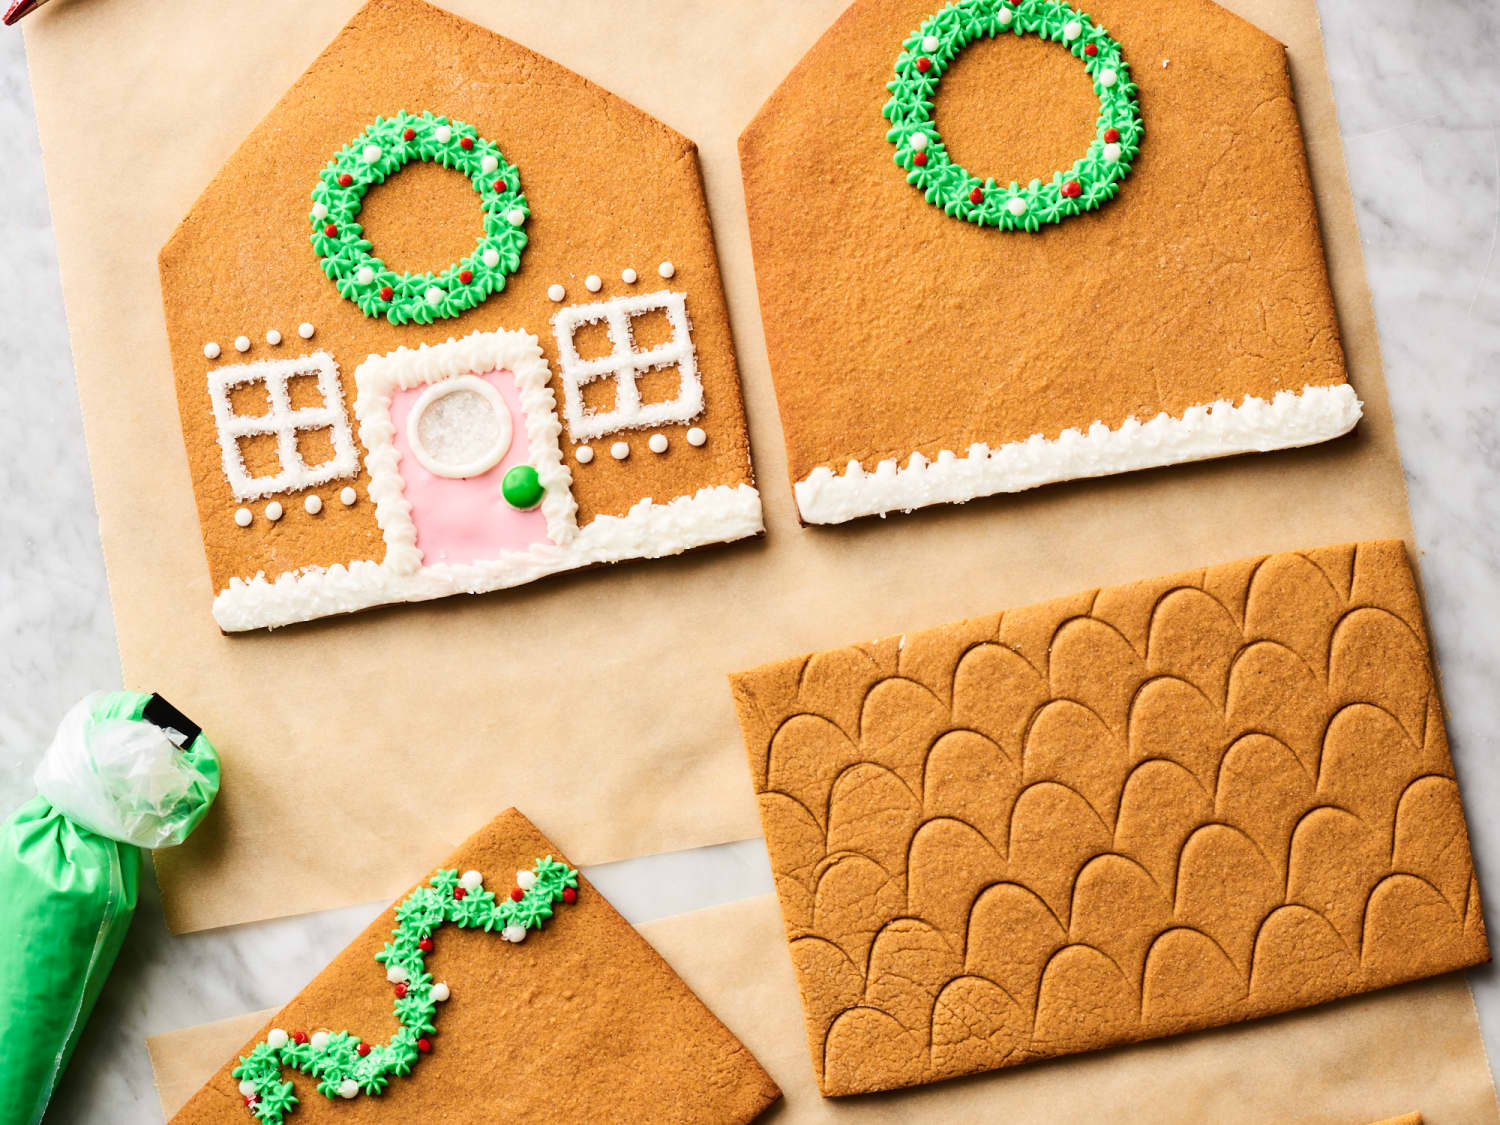 https://cdn.apartmenttherapy.info/image/upload/f_jpg,q_auto:eco,c_fill,g_auto,w_1500,ar_4:3/k%2FPhoto%2FRecipes%2F2019-12-HT-Easiest-Gingerbread-House%2FHT-Easiest-Gingerbread-House_068